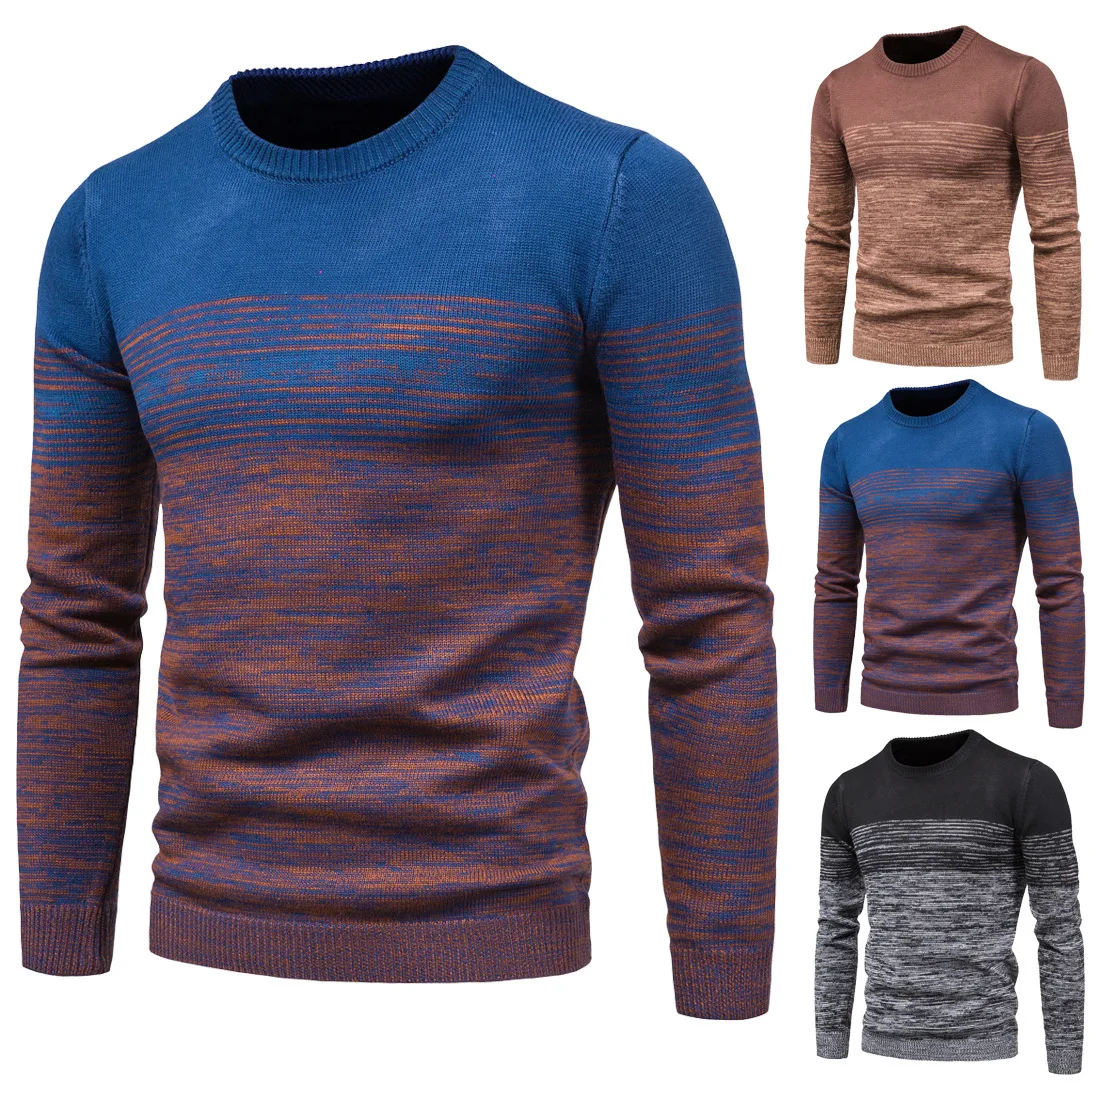 

New Autumn Men's Knitwear Hedging Round Neck Variegated Contrast Fashion Base Sweater Male Tops sweater daily basic autumn top